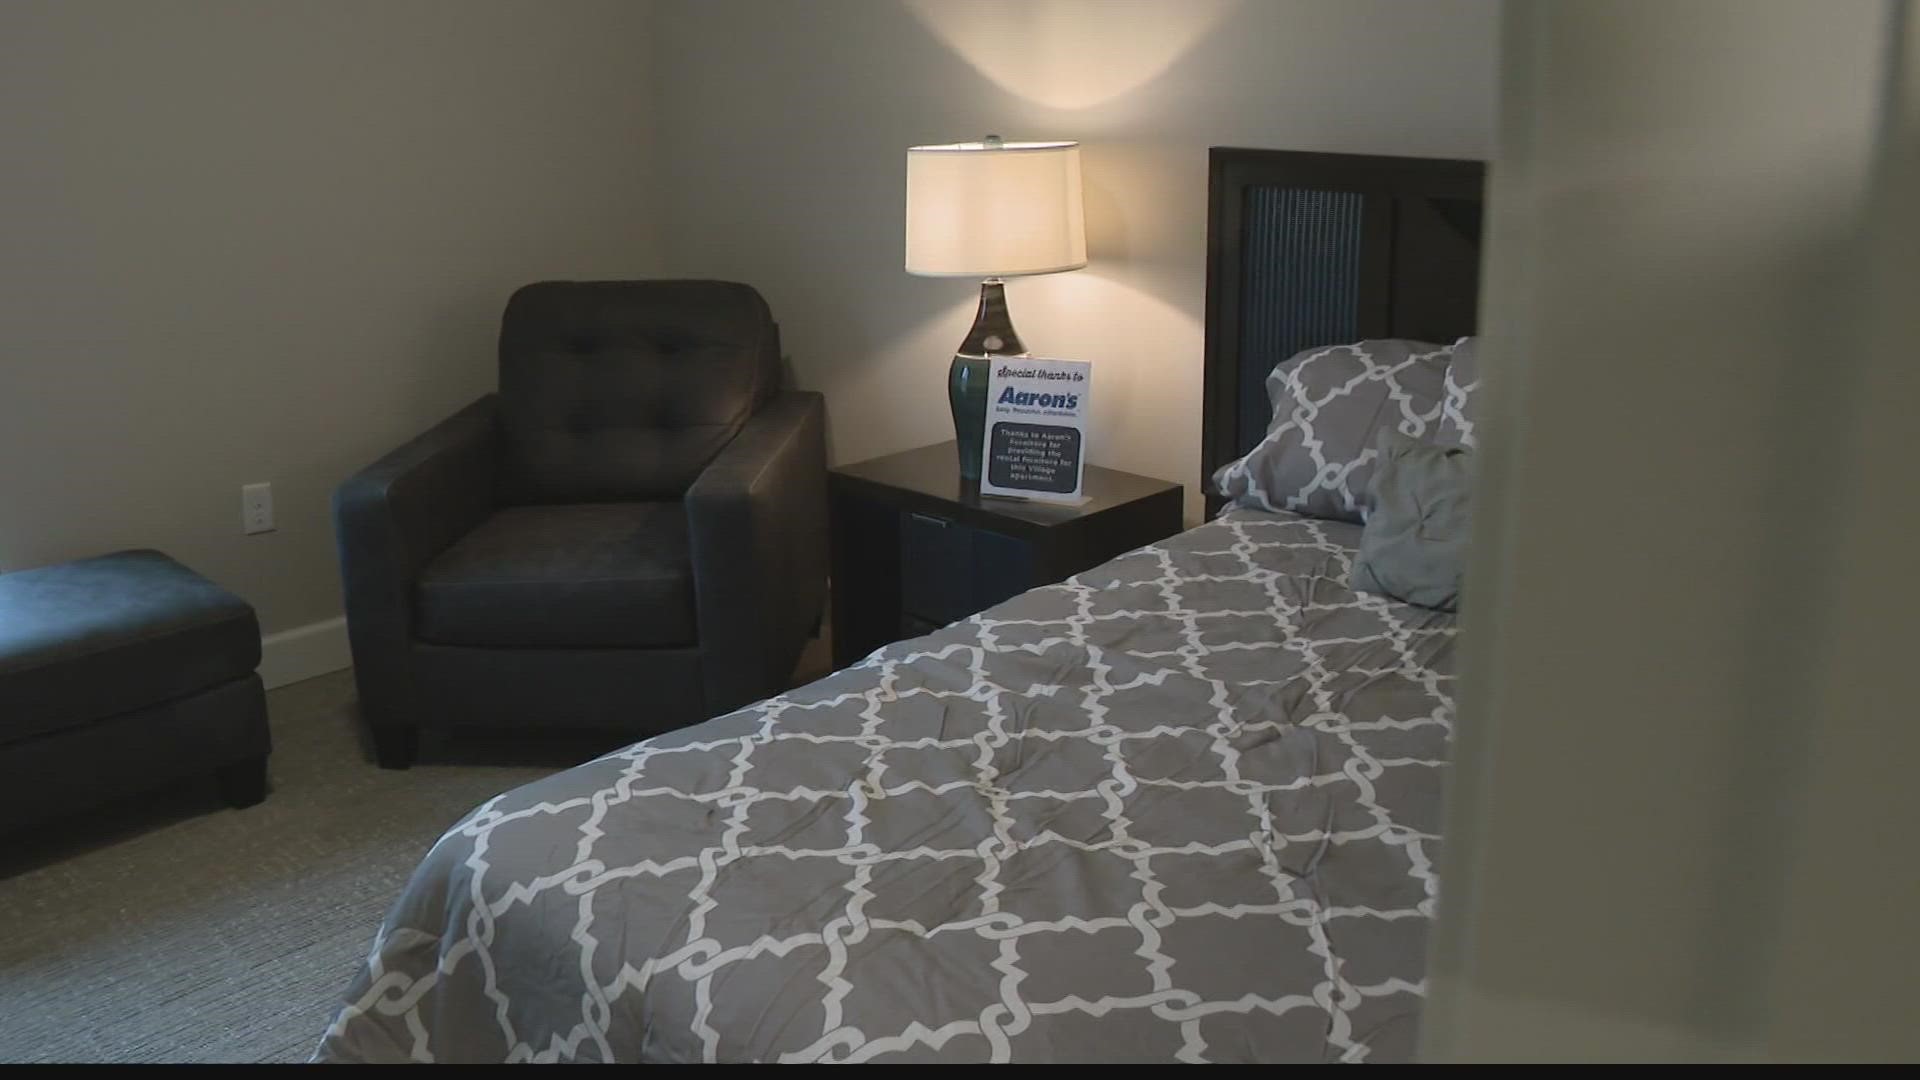 Damar Village opened for business Wednesday and will house up to 128 adults with disabilities.